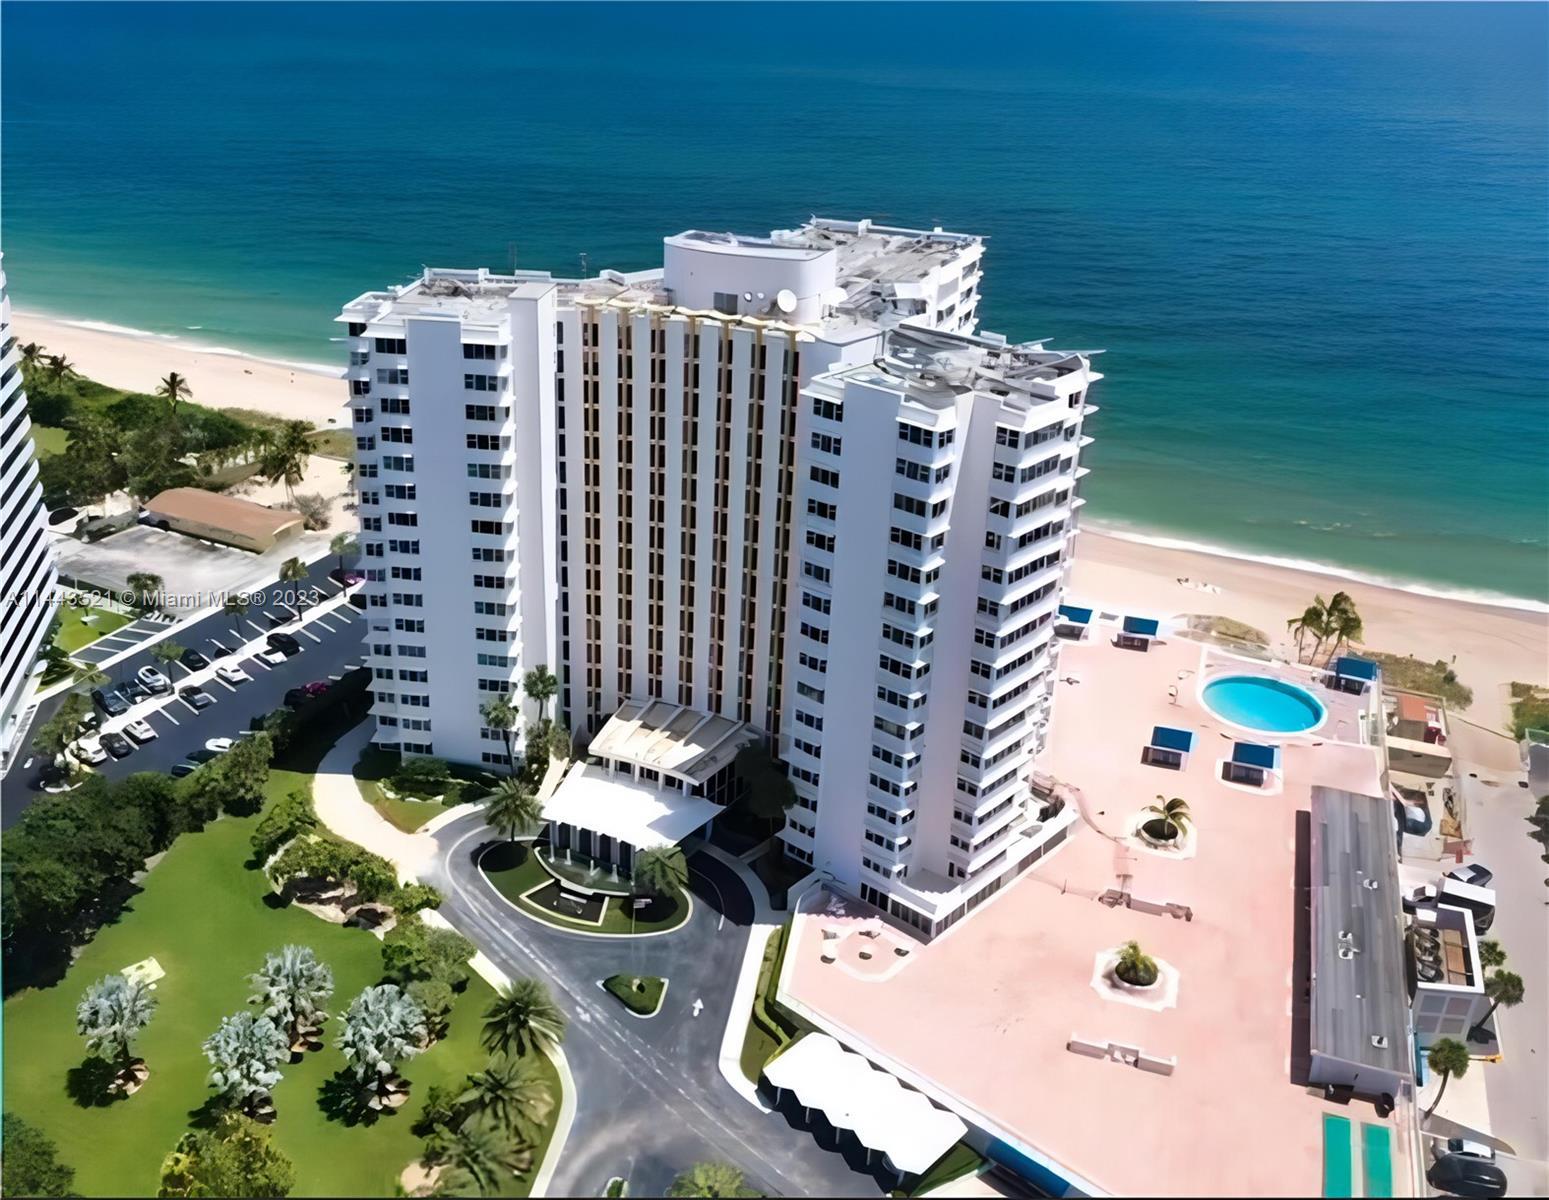 Rare opportunity to own a 2 bedroom unit at The Fountainhead, Lauderdale By The Sea's premier 55+ co